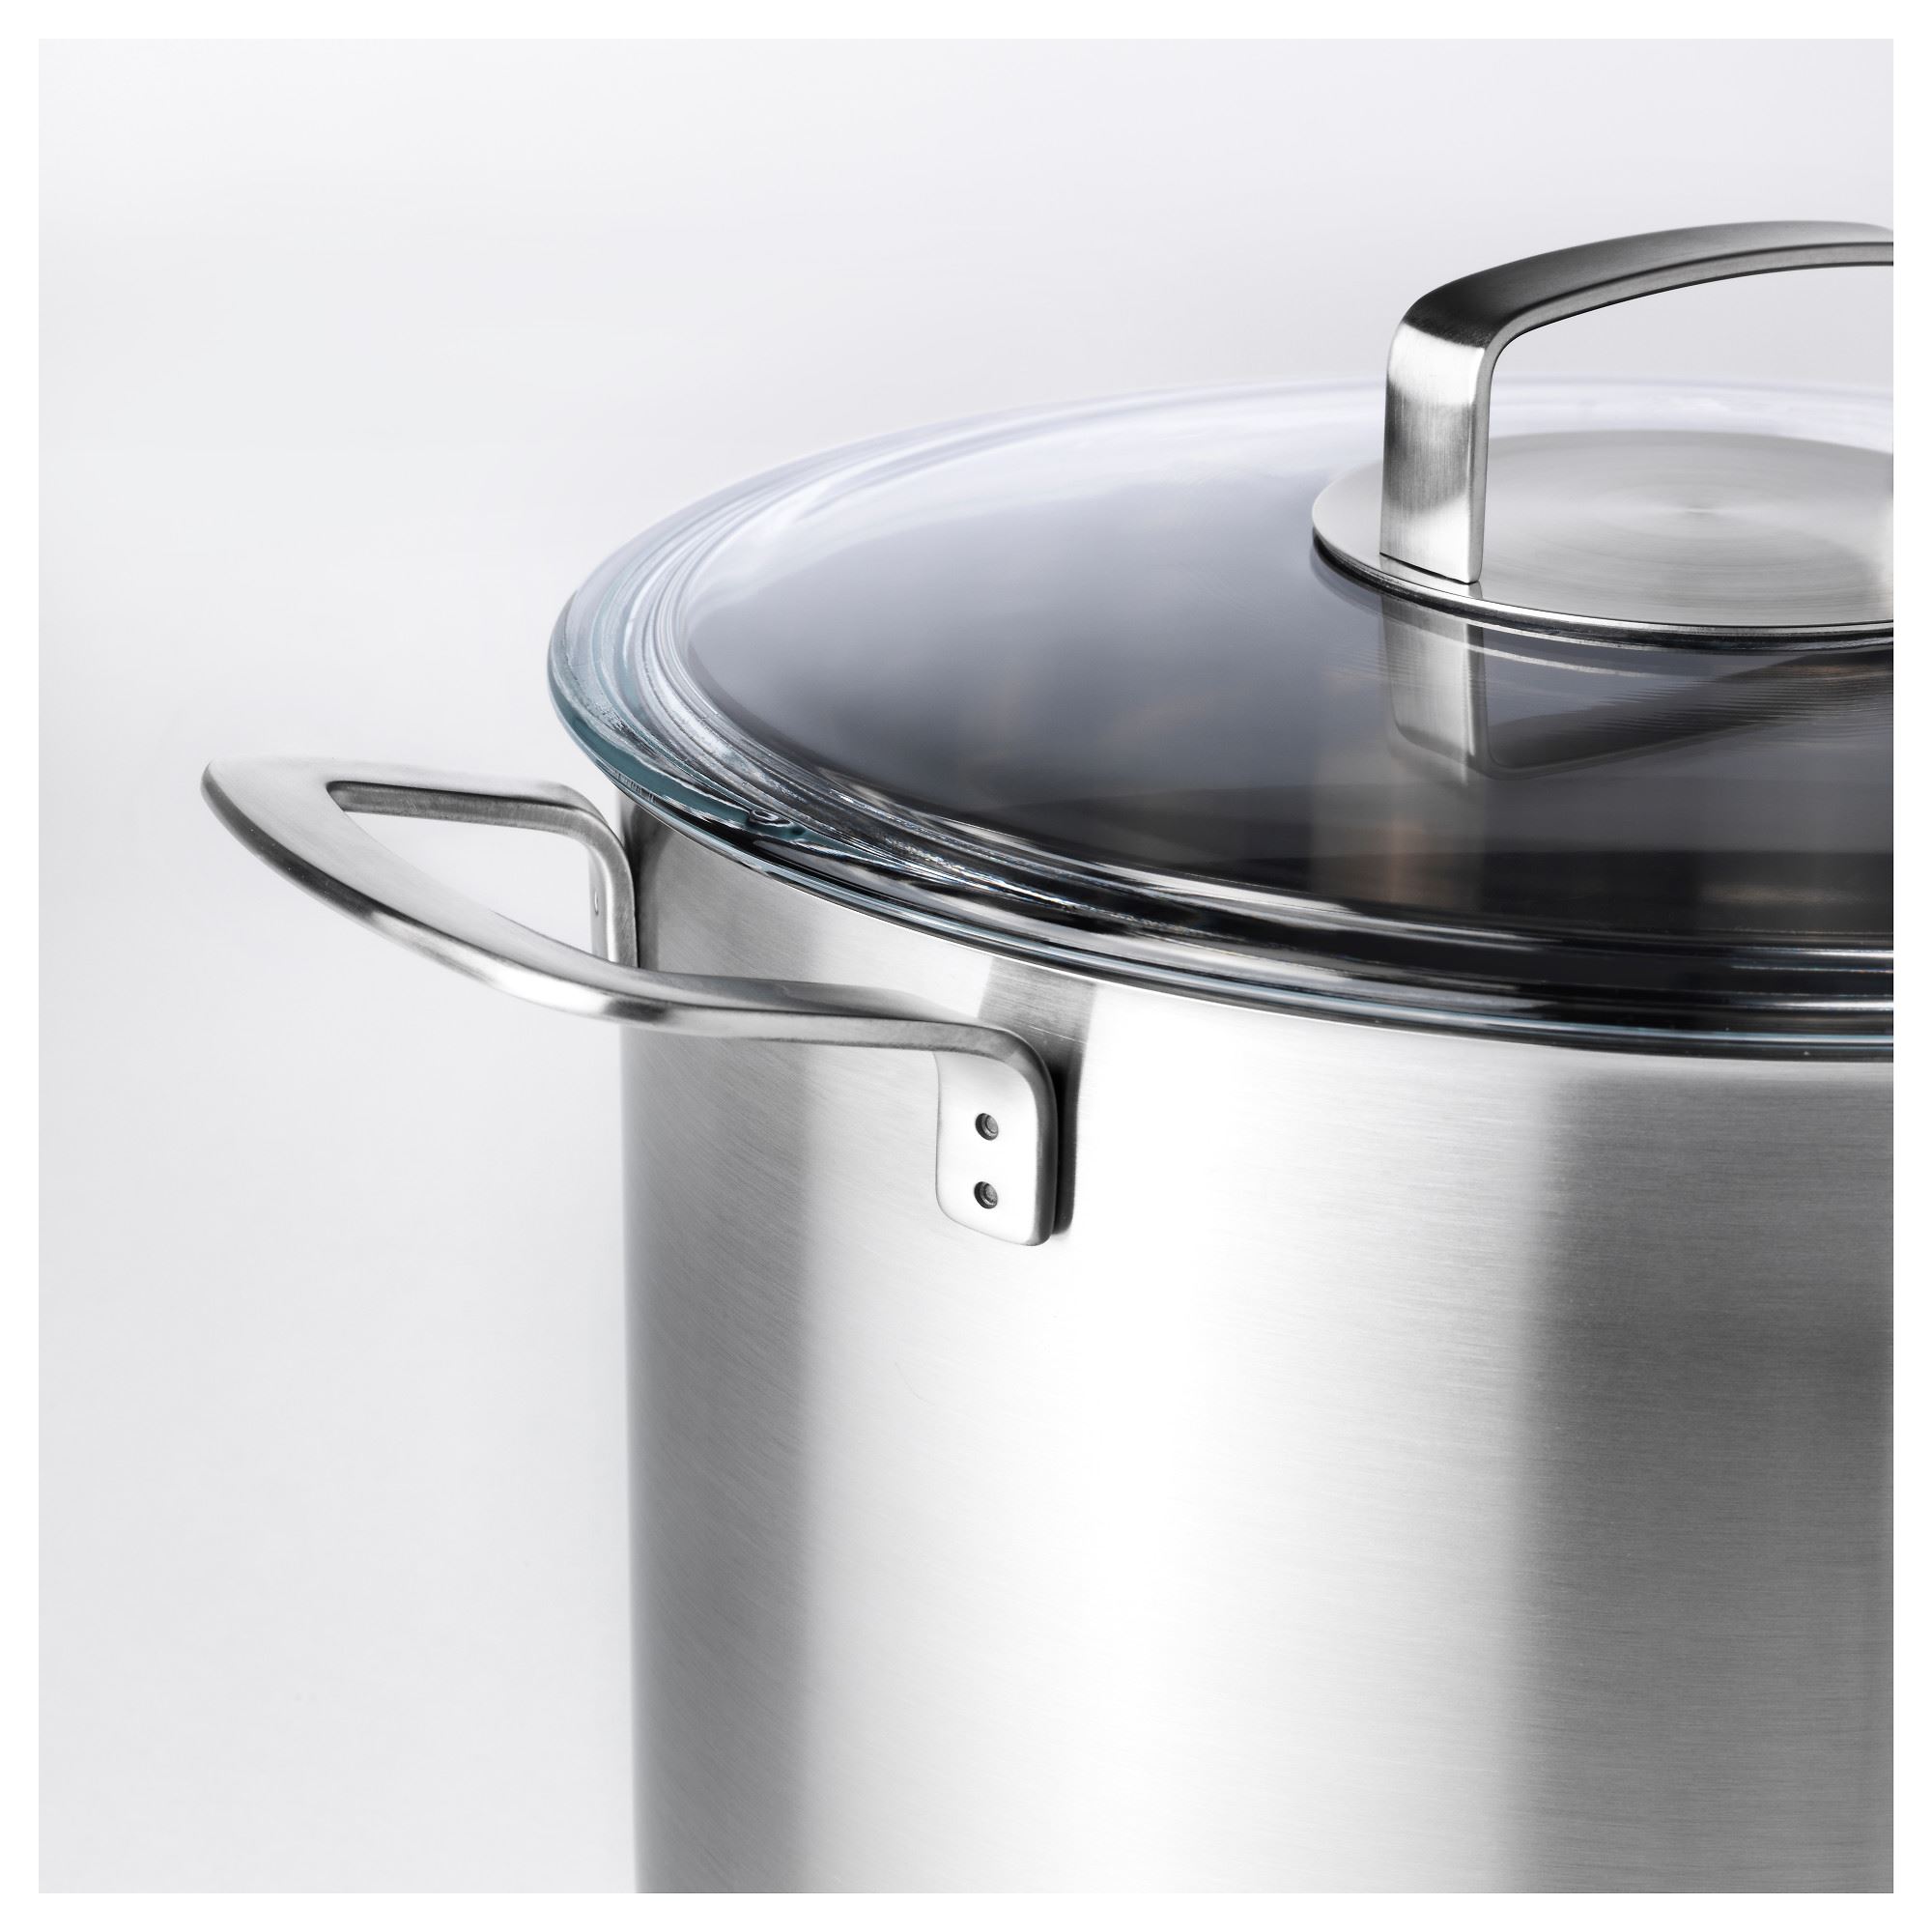  IKEA  365 pot  with lid stainless steel glass